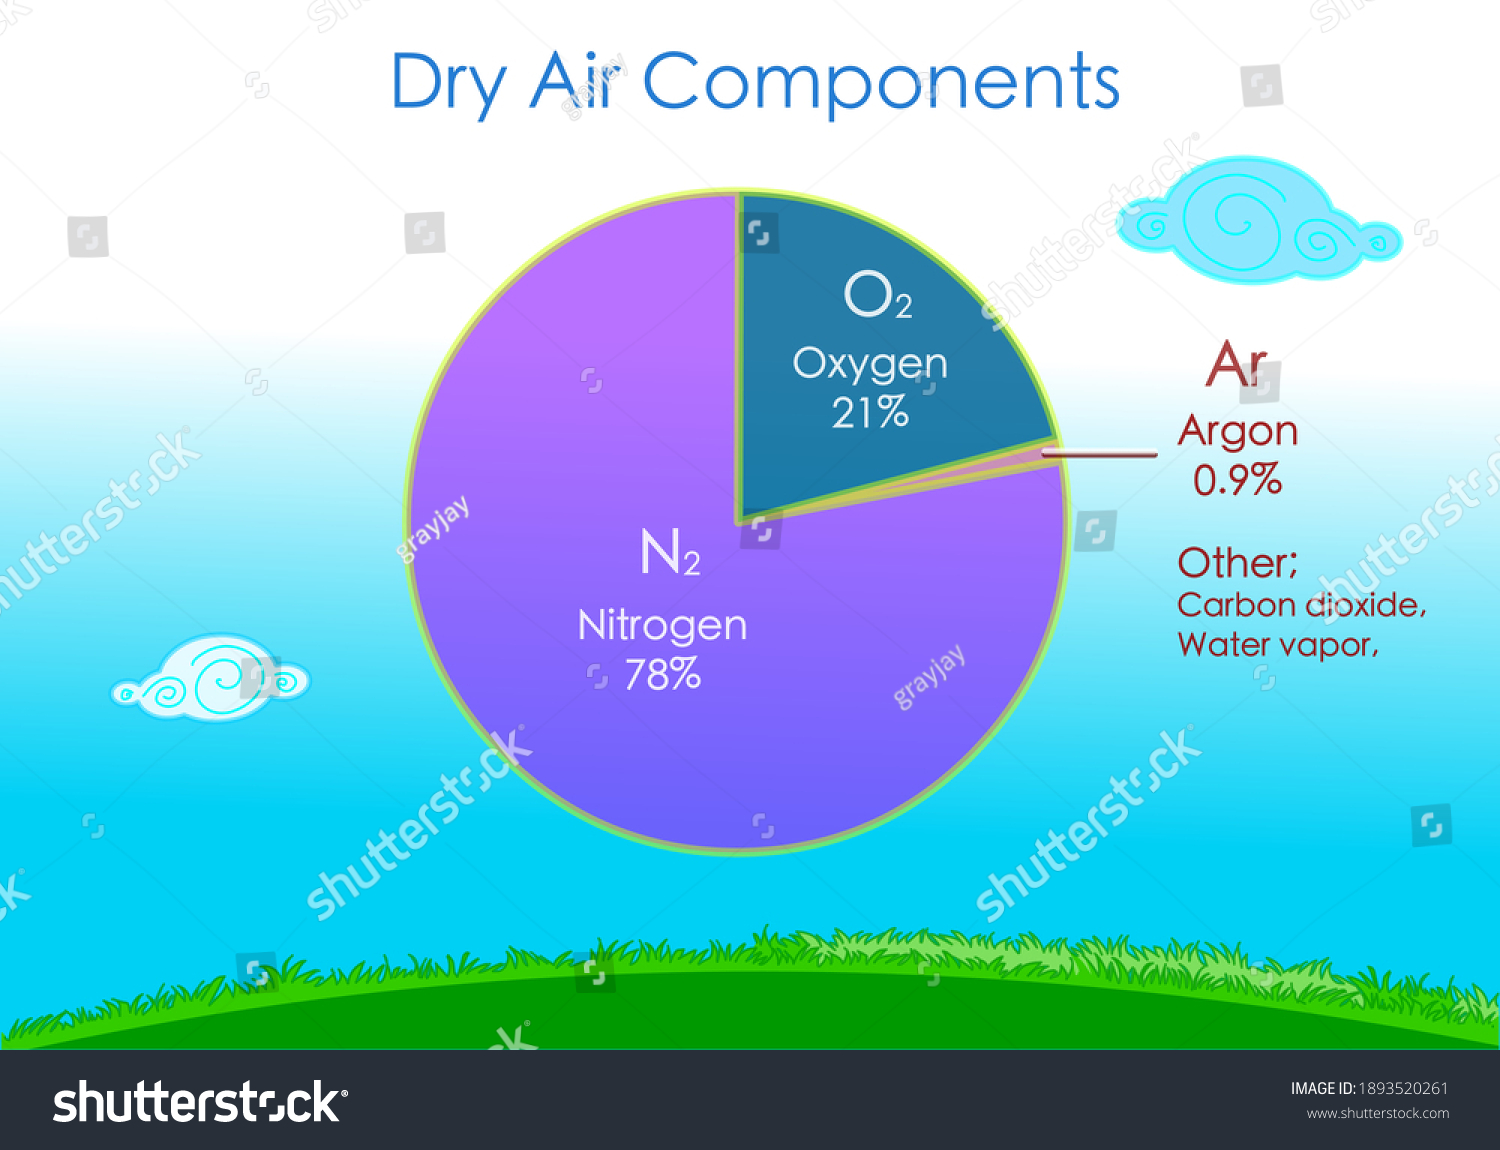 Dry air components diagram. Atmosphere composition gases pie chart. Percentage infographic. Nitrogen oxygen, vapor, argon other gasses % rate. Blue white outdoor background. illustration vector #1893520261